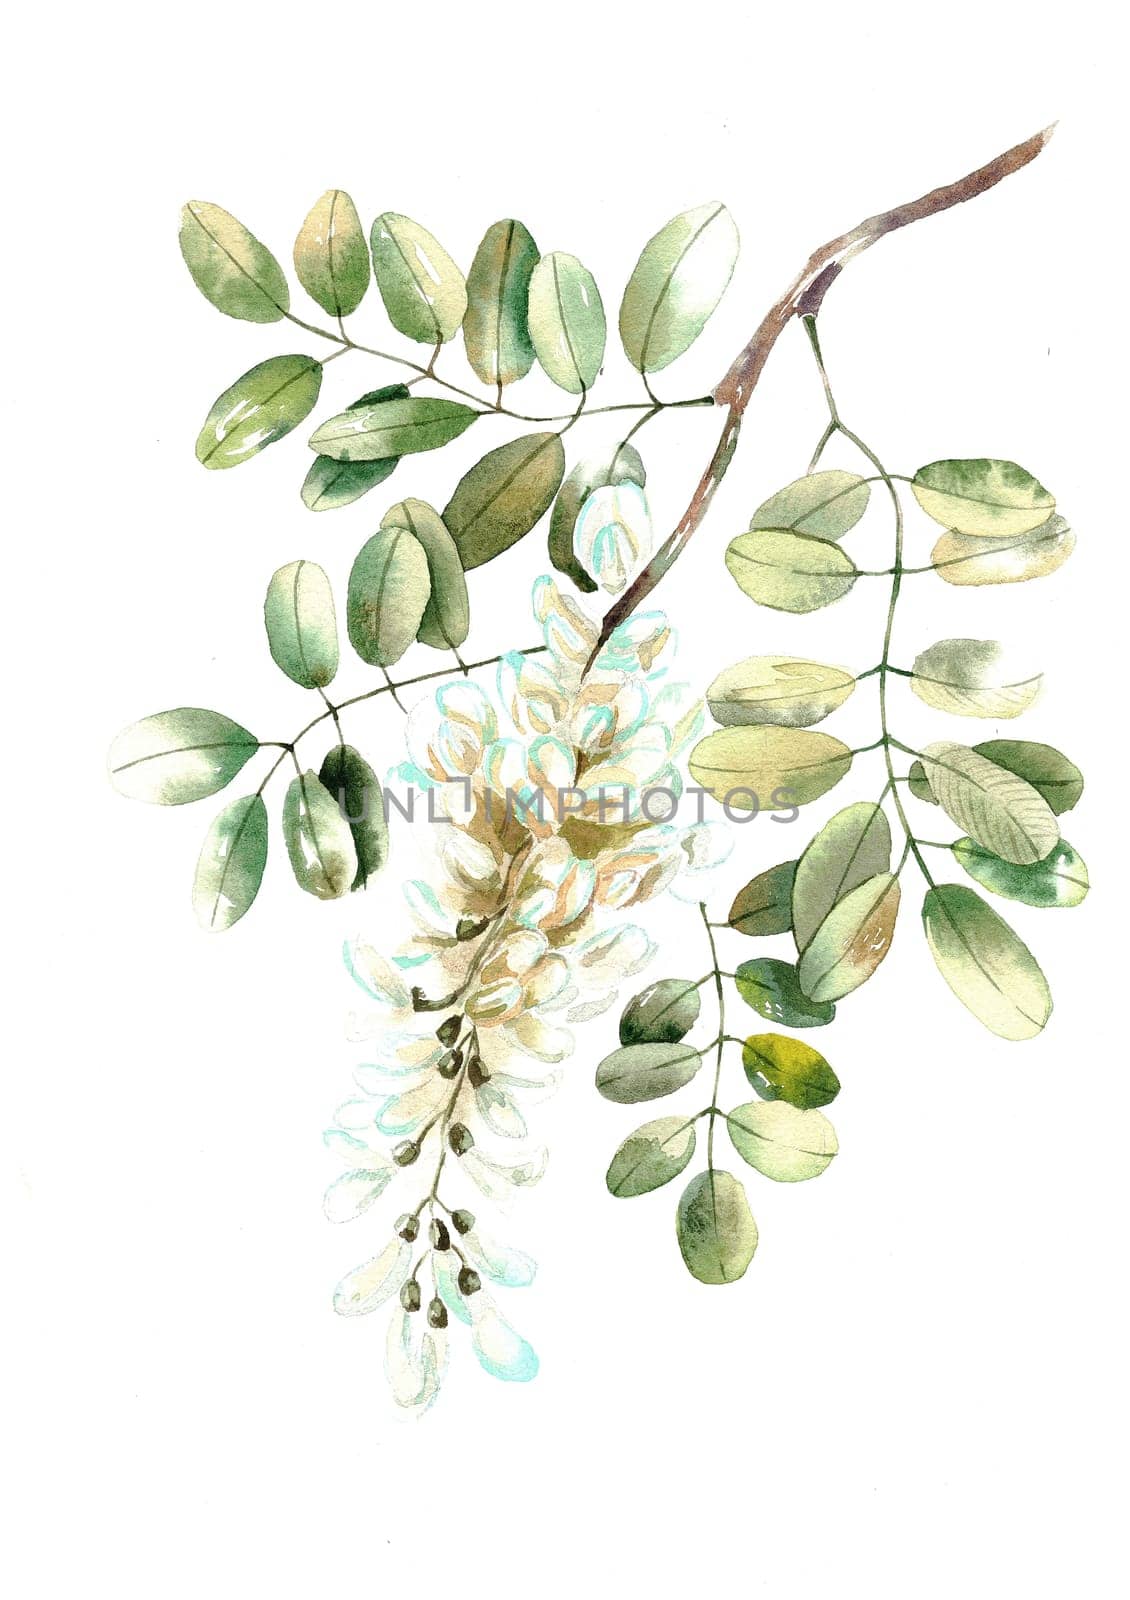 Floral twig with leaves and buds. Hand drawn white acacia